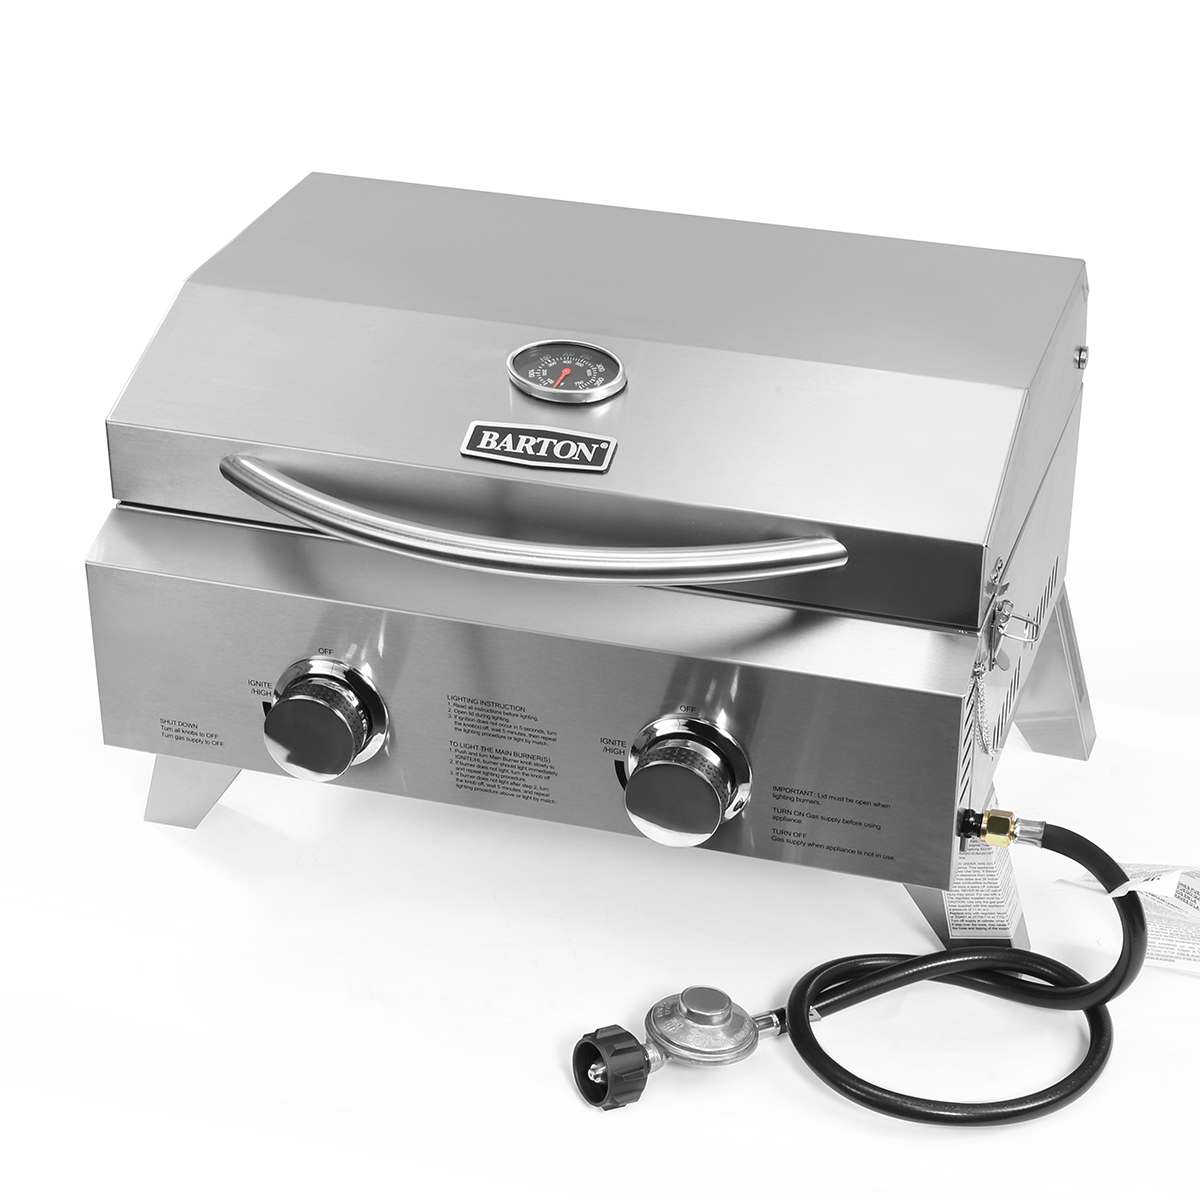 Tabletop 20,000 BTU, 2 Burner Grill Portable BBQ Table Top Propane Gas Grill With Foldable Legs, Stainless Steel - image 2 of 4